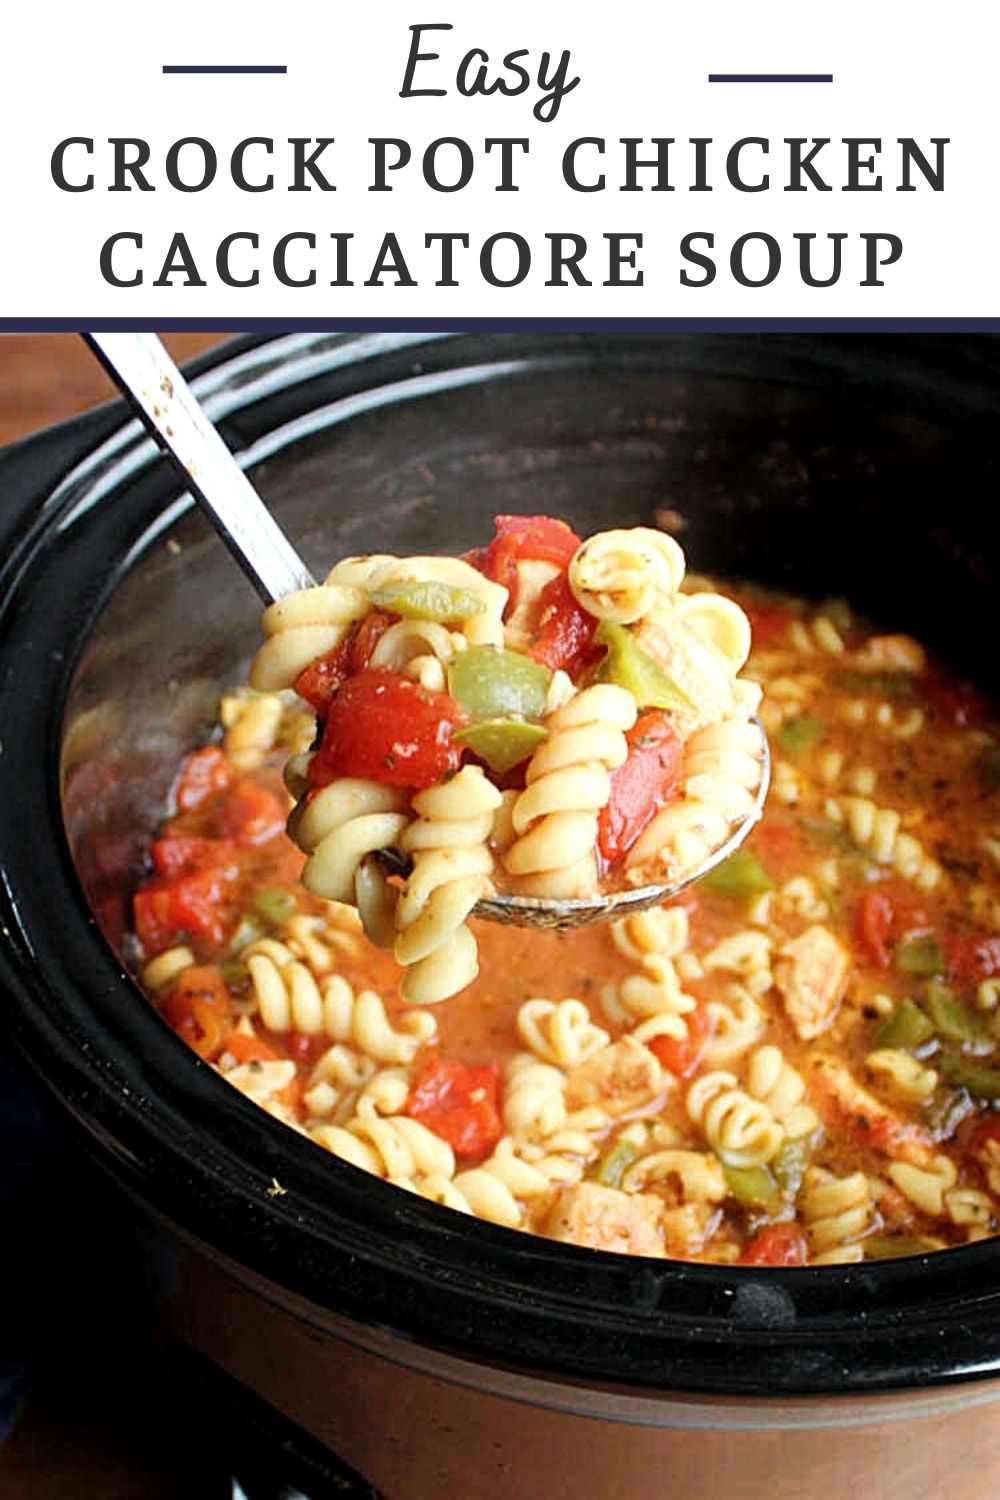 This simple Italian inspired chicken soup comes together in a slow cooker leaving you free to go about your day. Stir in some pasta about a half an hour before it's time to eat and dinner is ready! It will fill your family's bellies and warm them right up. Nobody will have to know how easy it was to make, that can be our little secret!